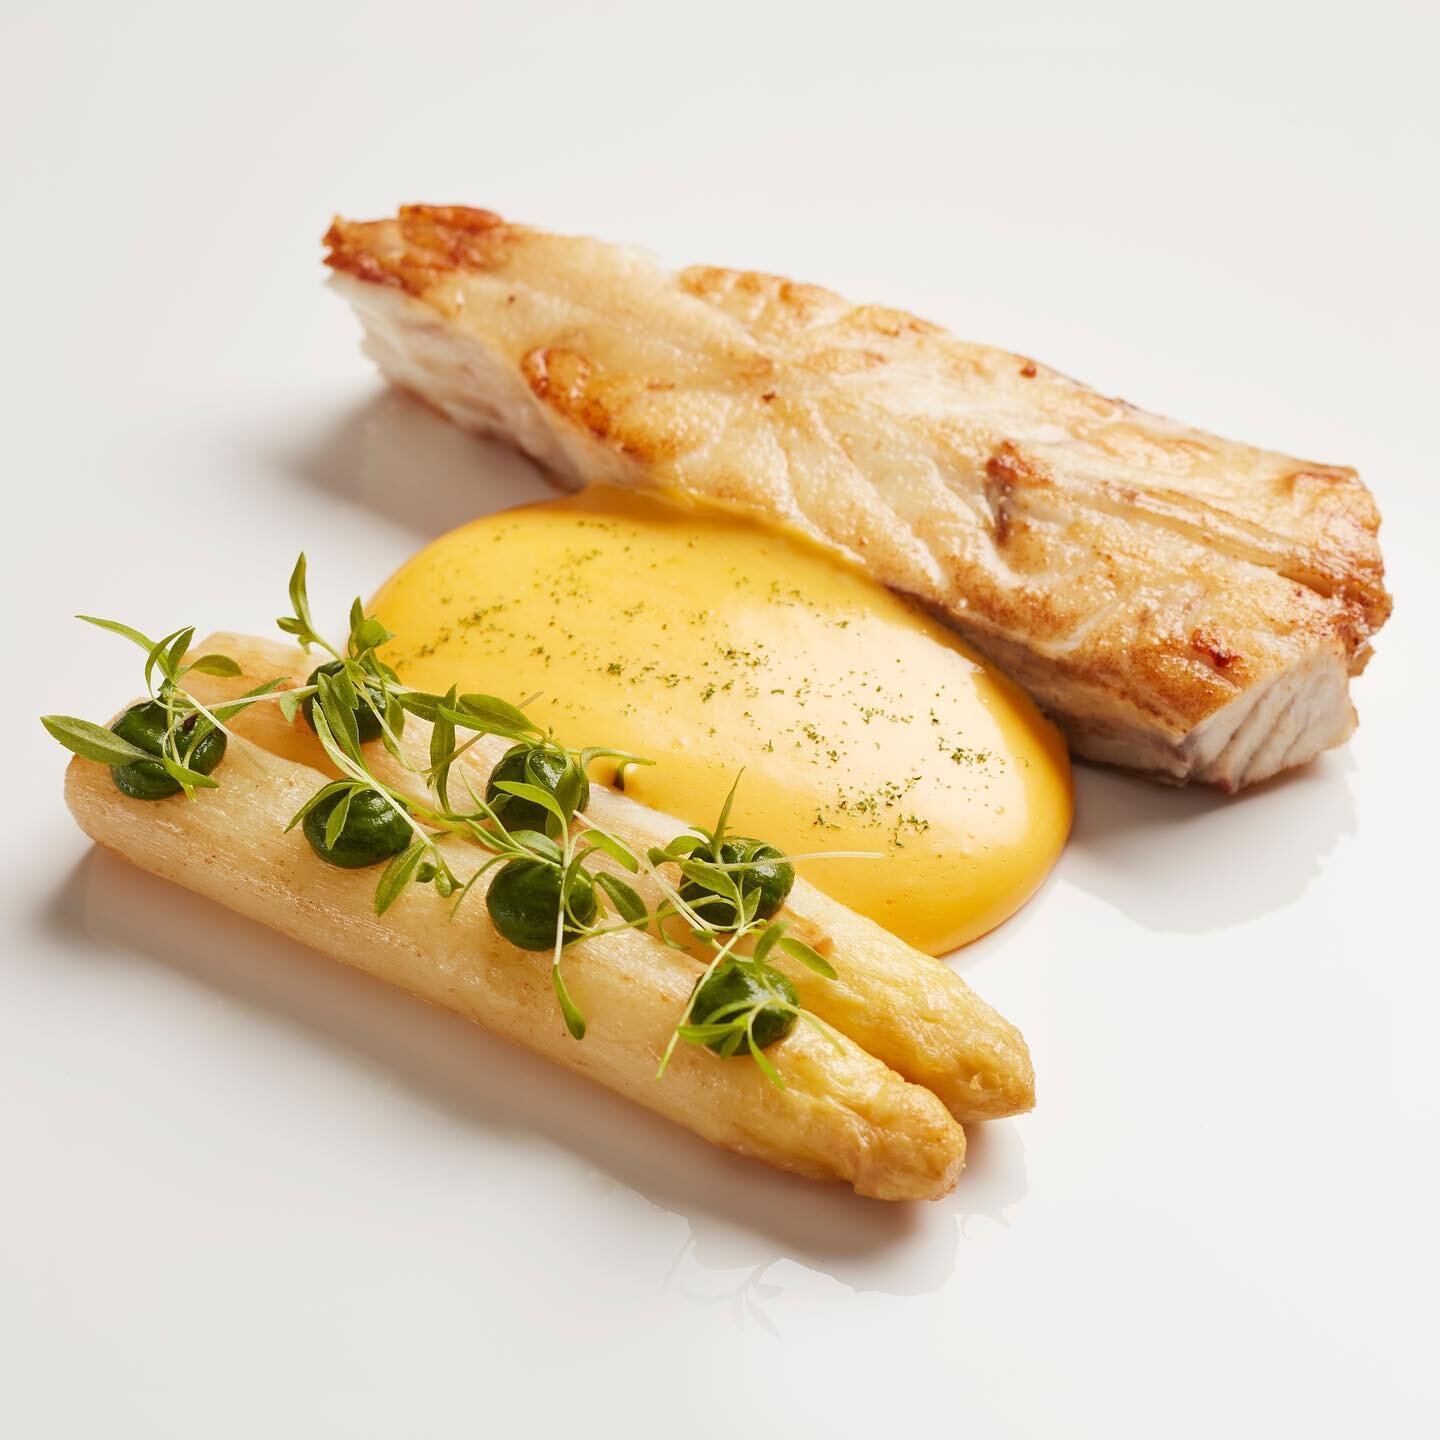 💌 Join our team! 

We are looking for Pastry Demi Chef, Barman and Chef de Rang.

Send your CV to edwina@le-gaveoche.com to become a part of our story!

📸: Darne de Turbot R&ocirc;tie, Asperges Blanches et Sauce Hollandaise (Roast Turbot on the Bon